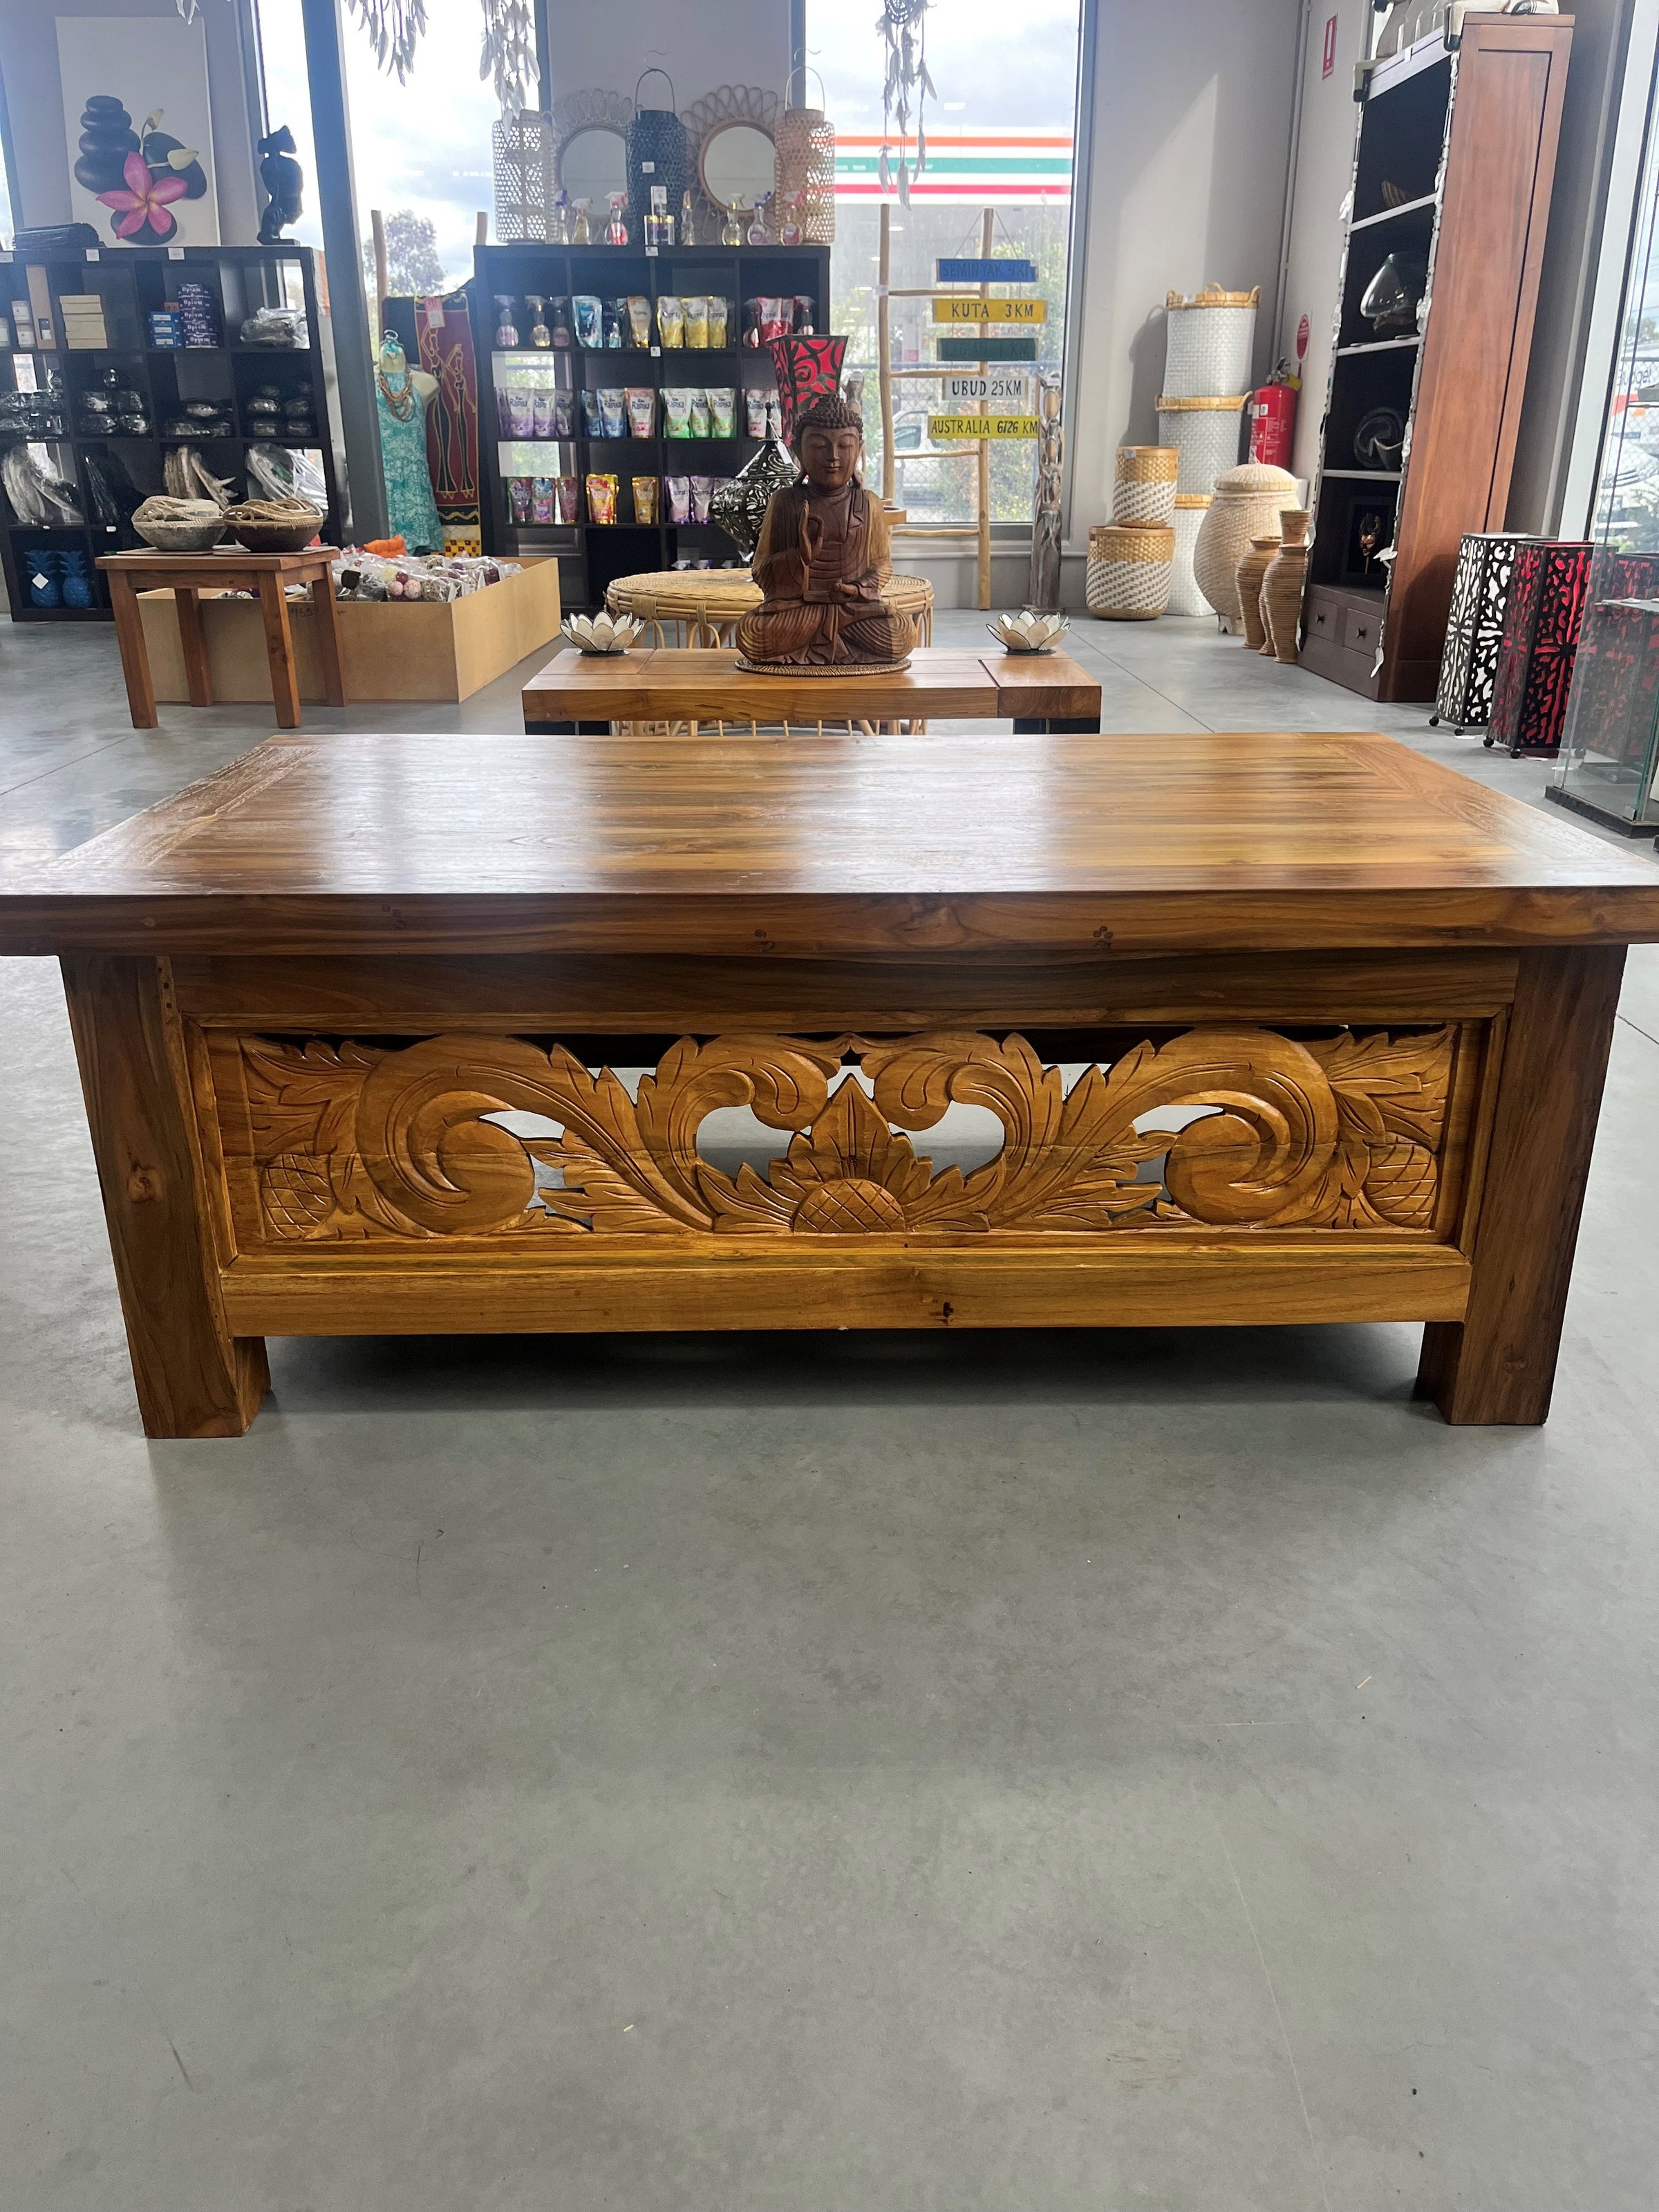 Balinese Hand Crafted Coffee Table